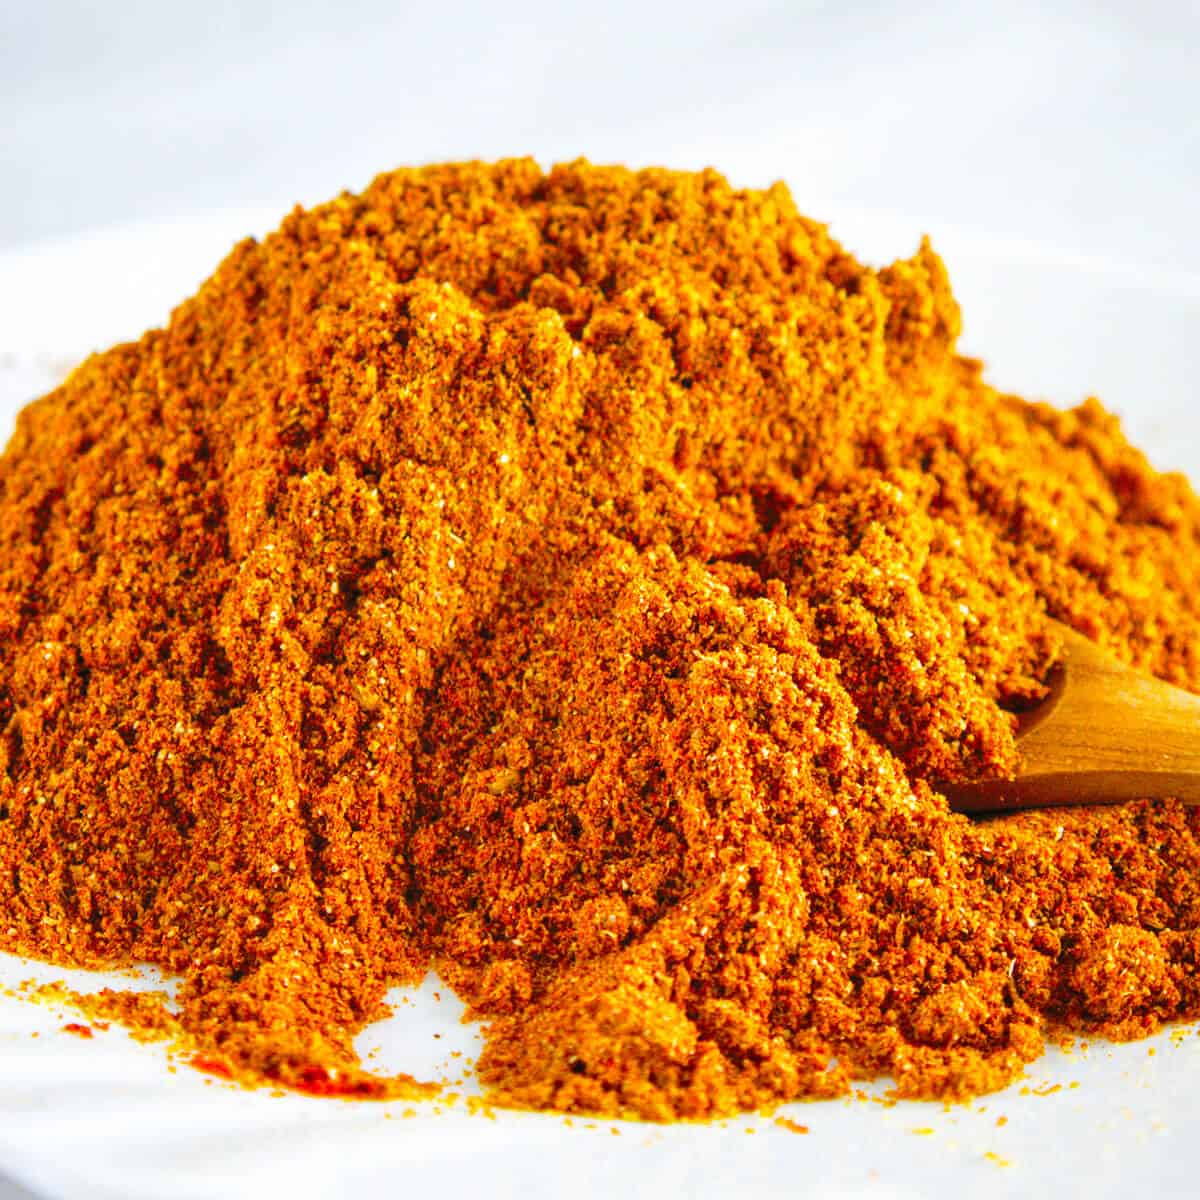 a small pile of orange seasoning with a small wooden spoon